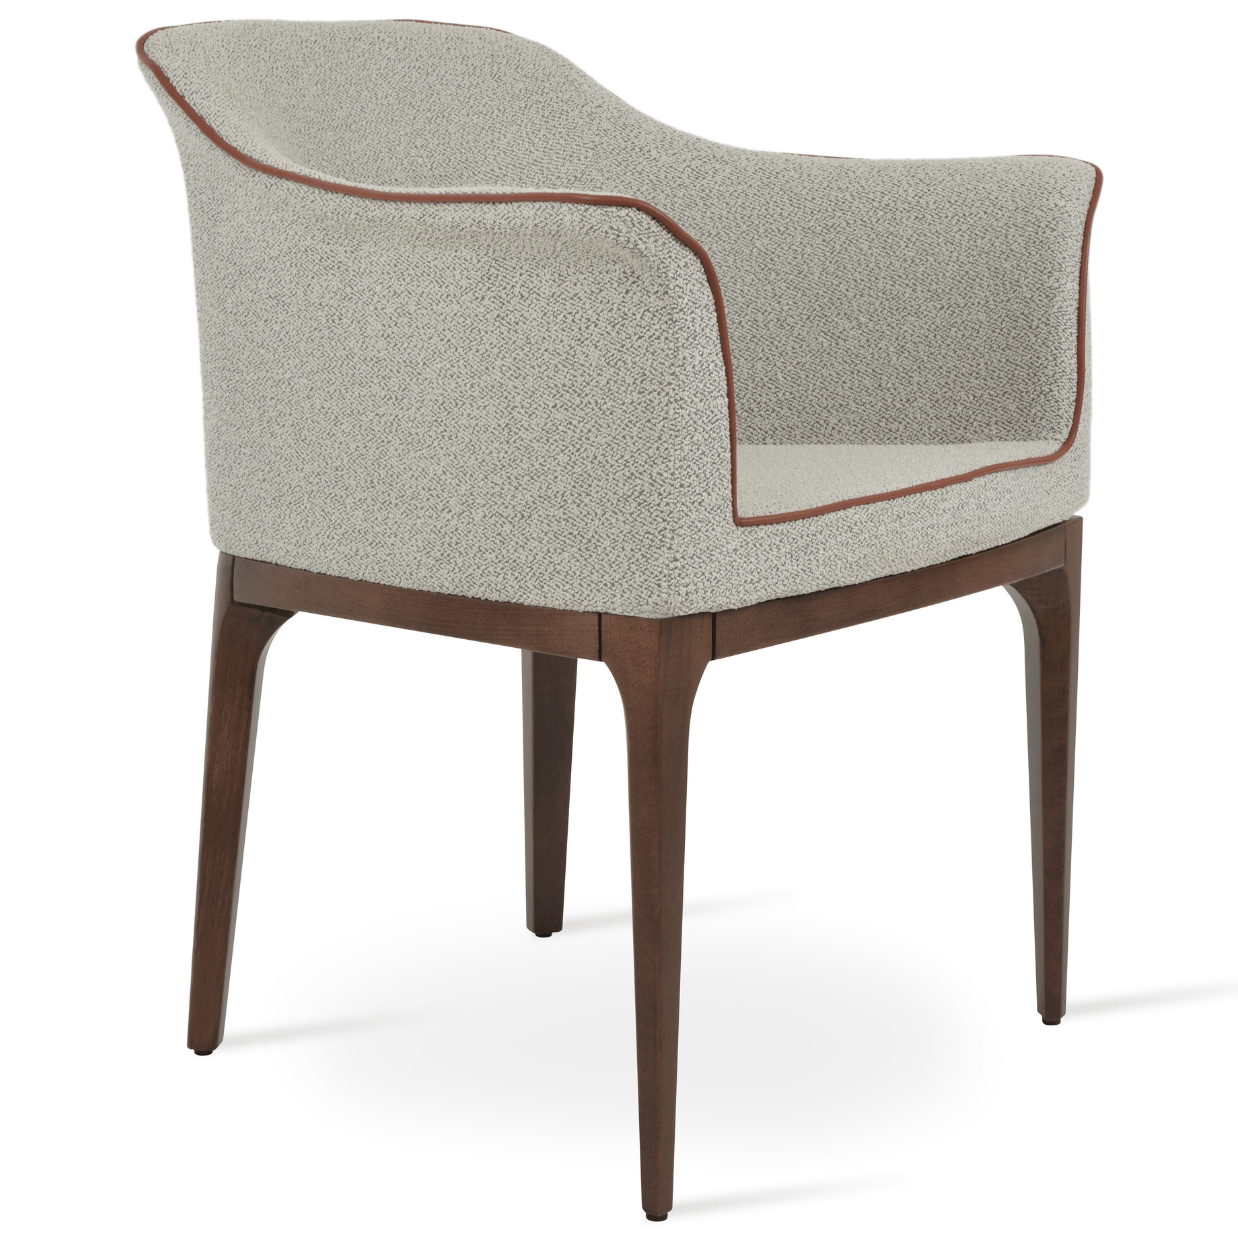 London Upholstered Dining Arm Chair - Your Bar Stools Canada